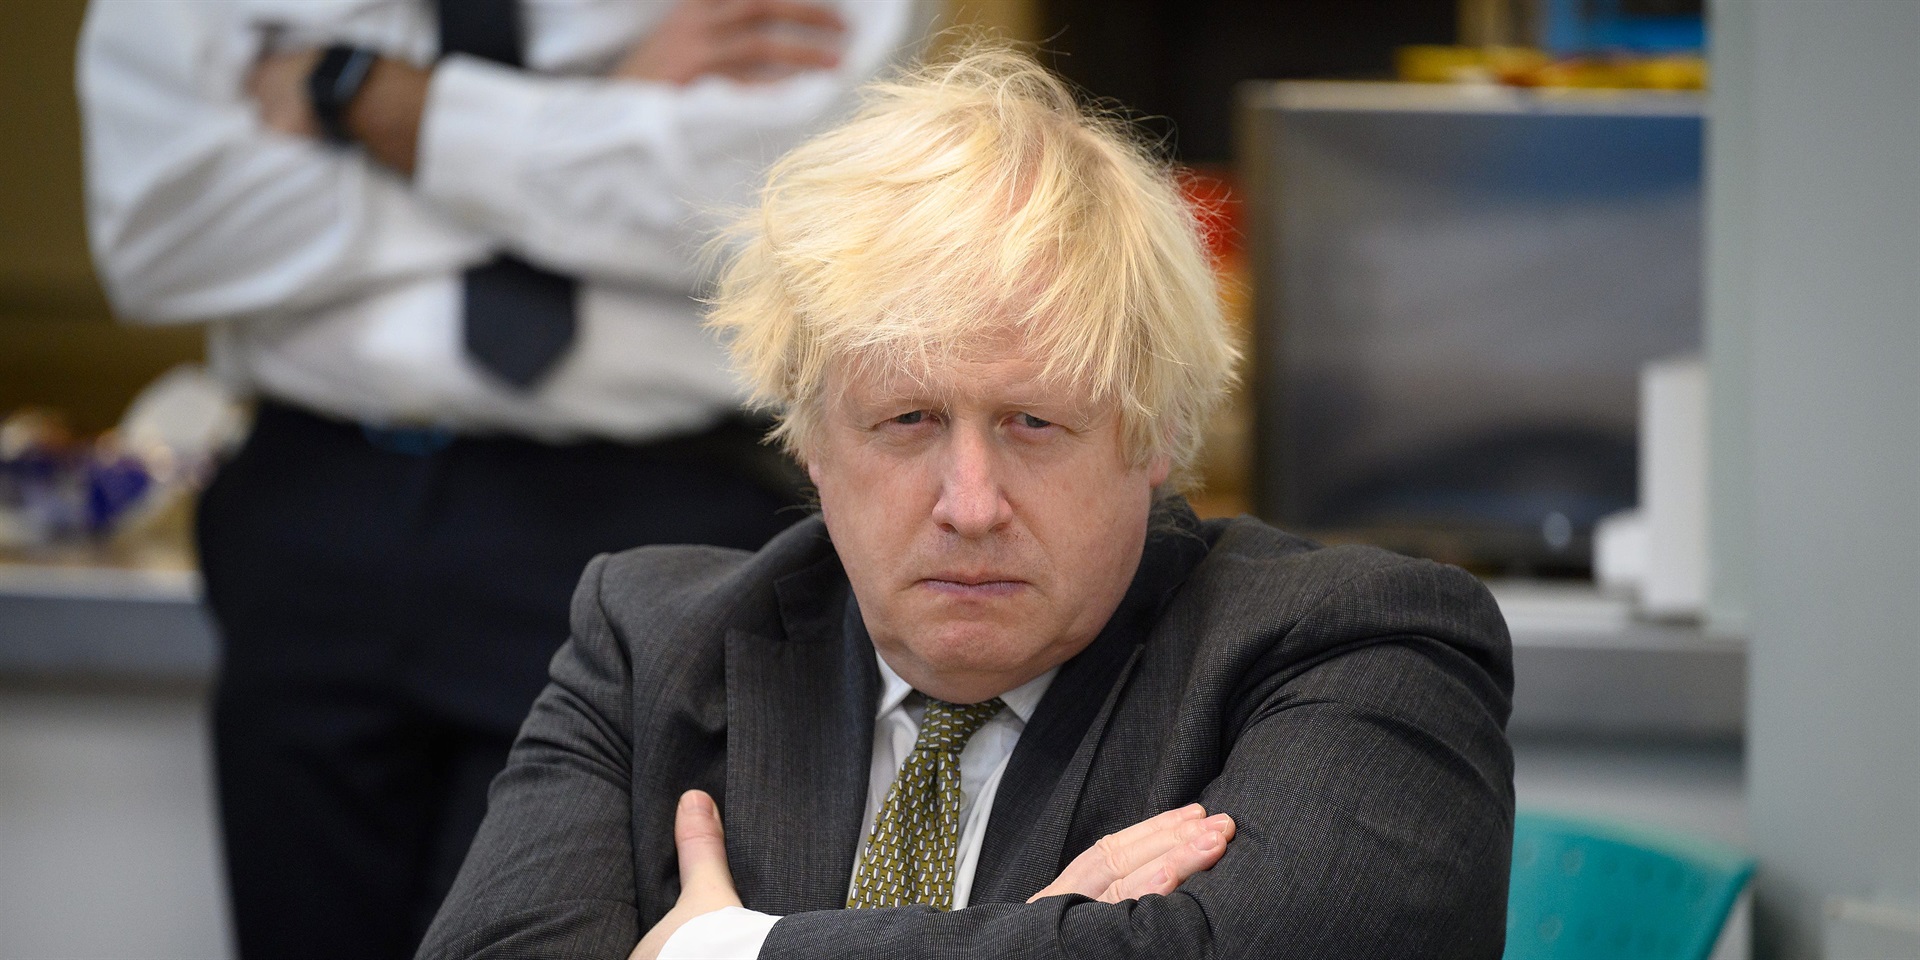 johnson-calls-end-to-most-covid-19-restrictions-in-england-news24